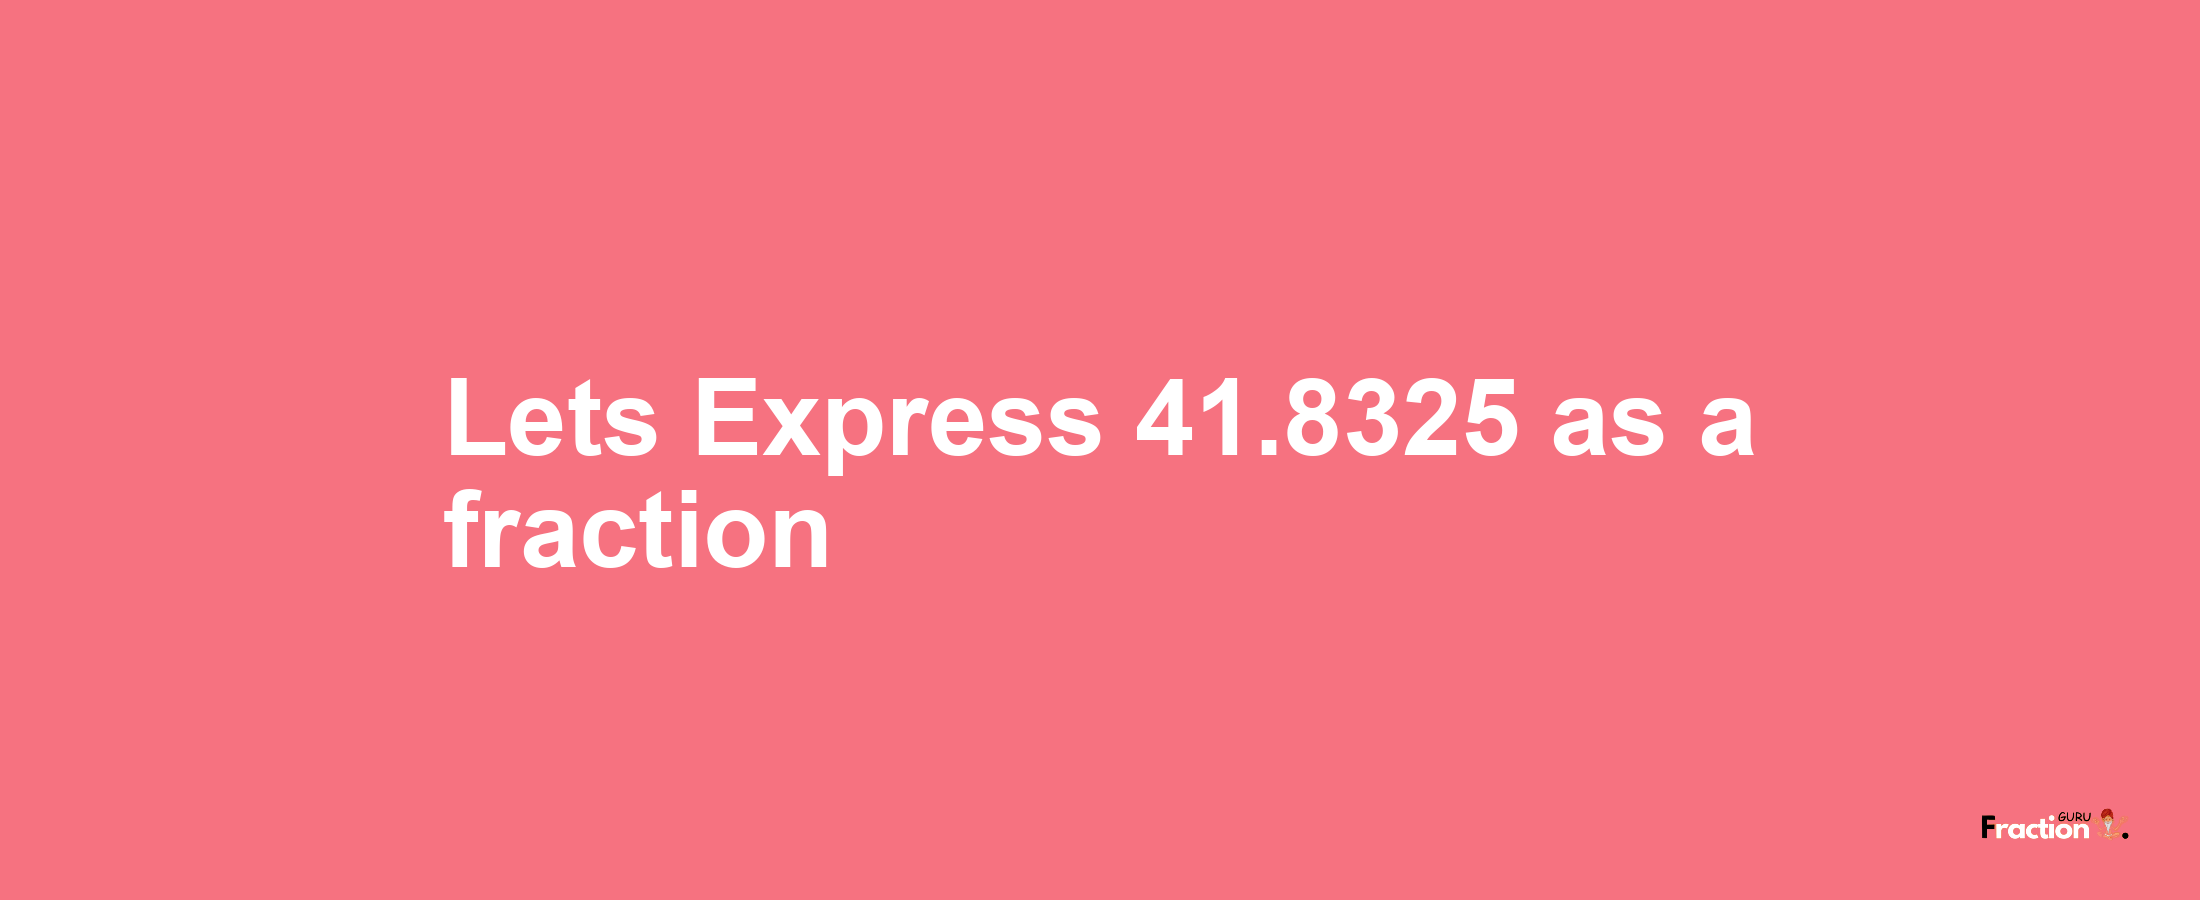 Lets Express 41.8325 as afraction